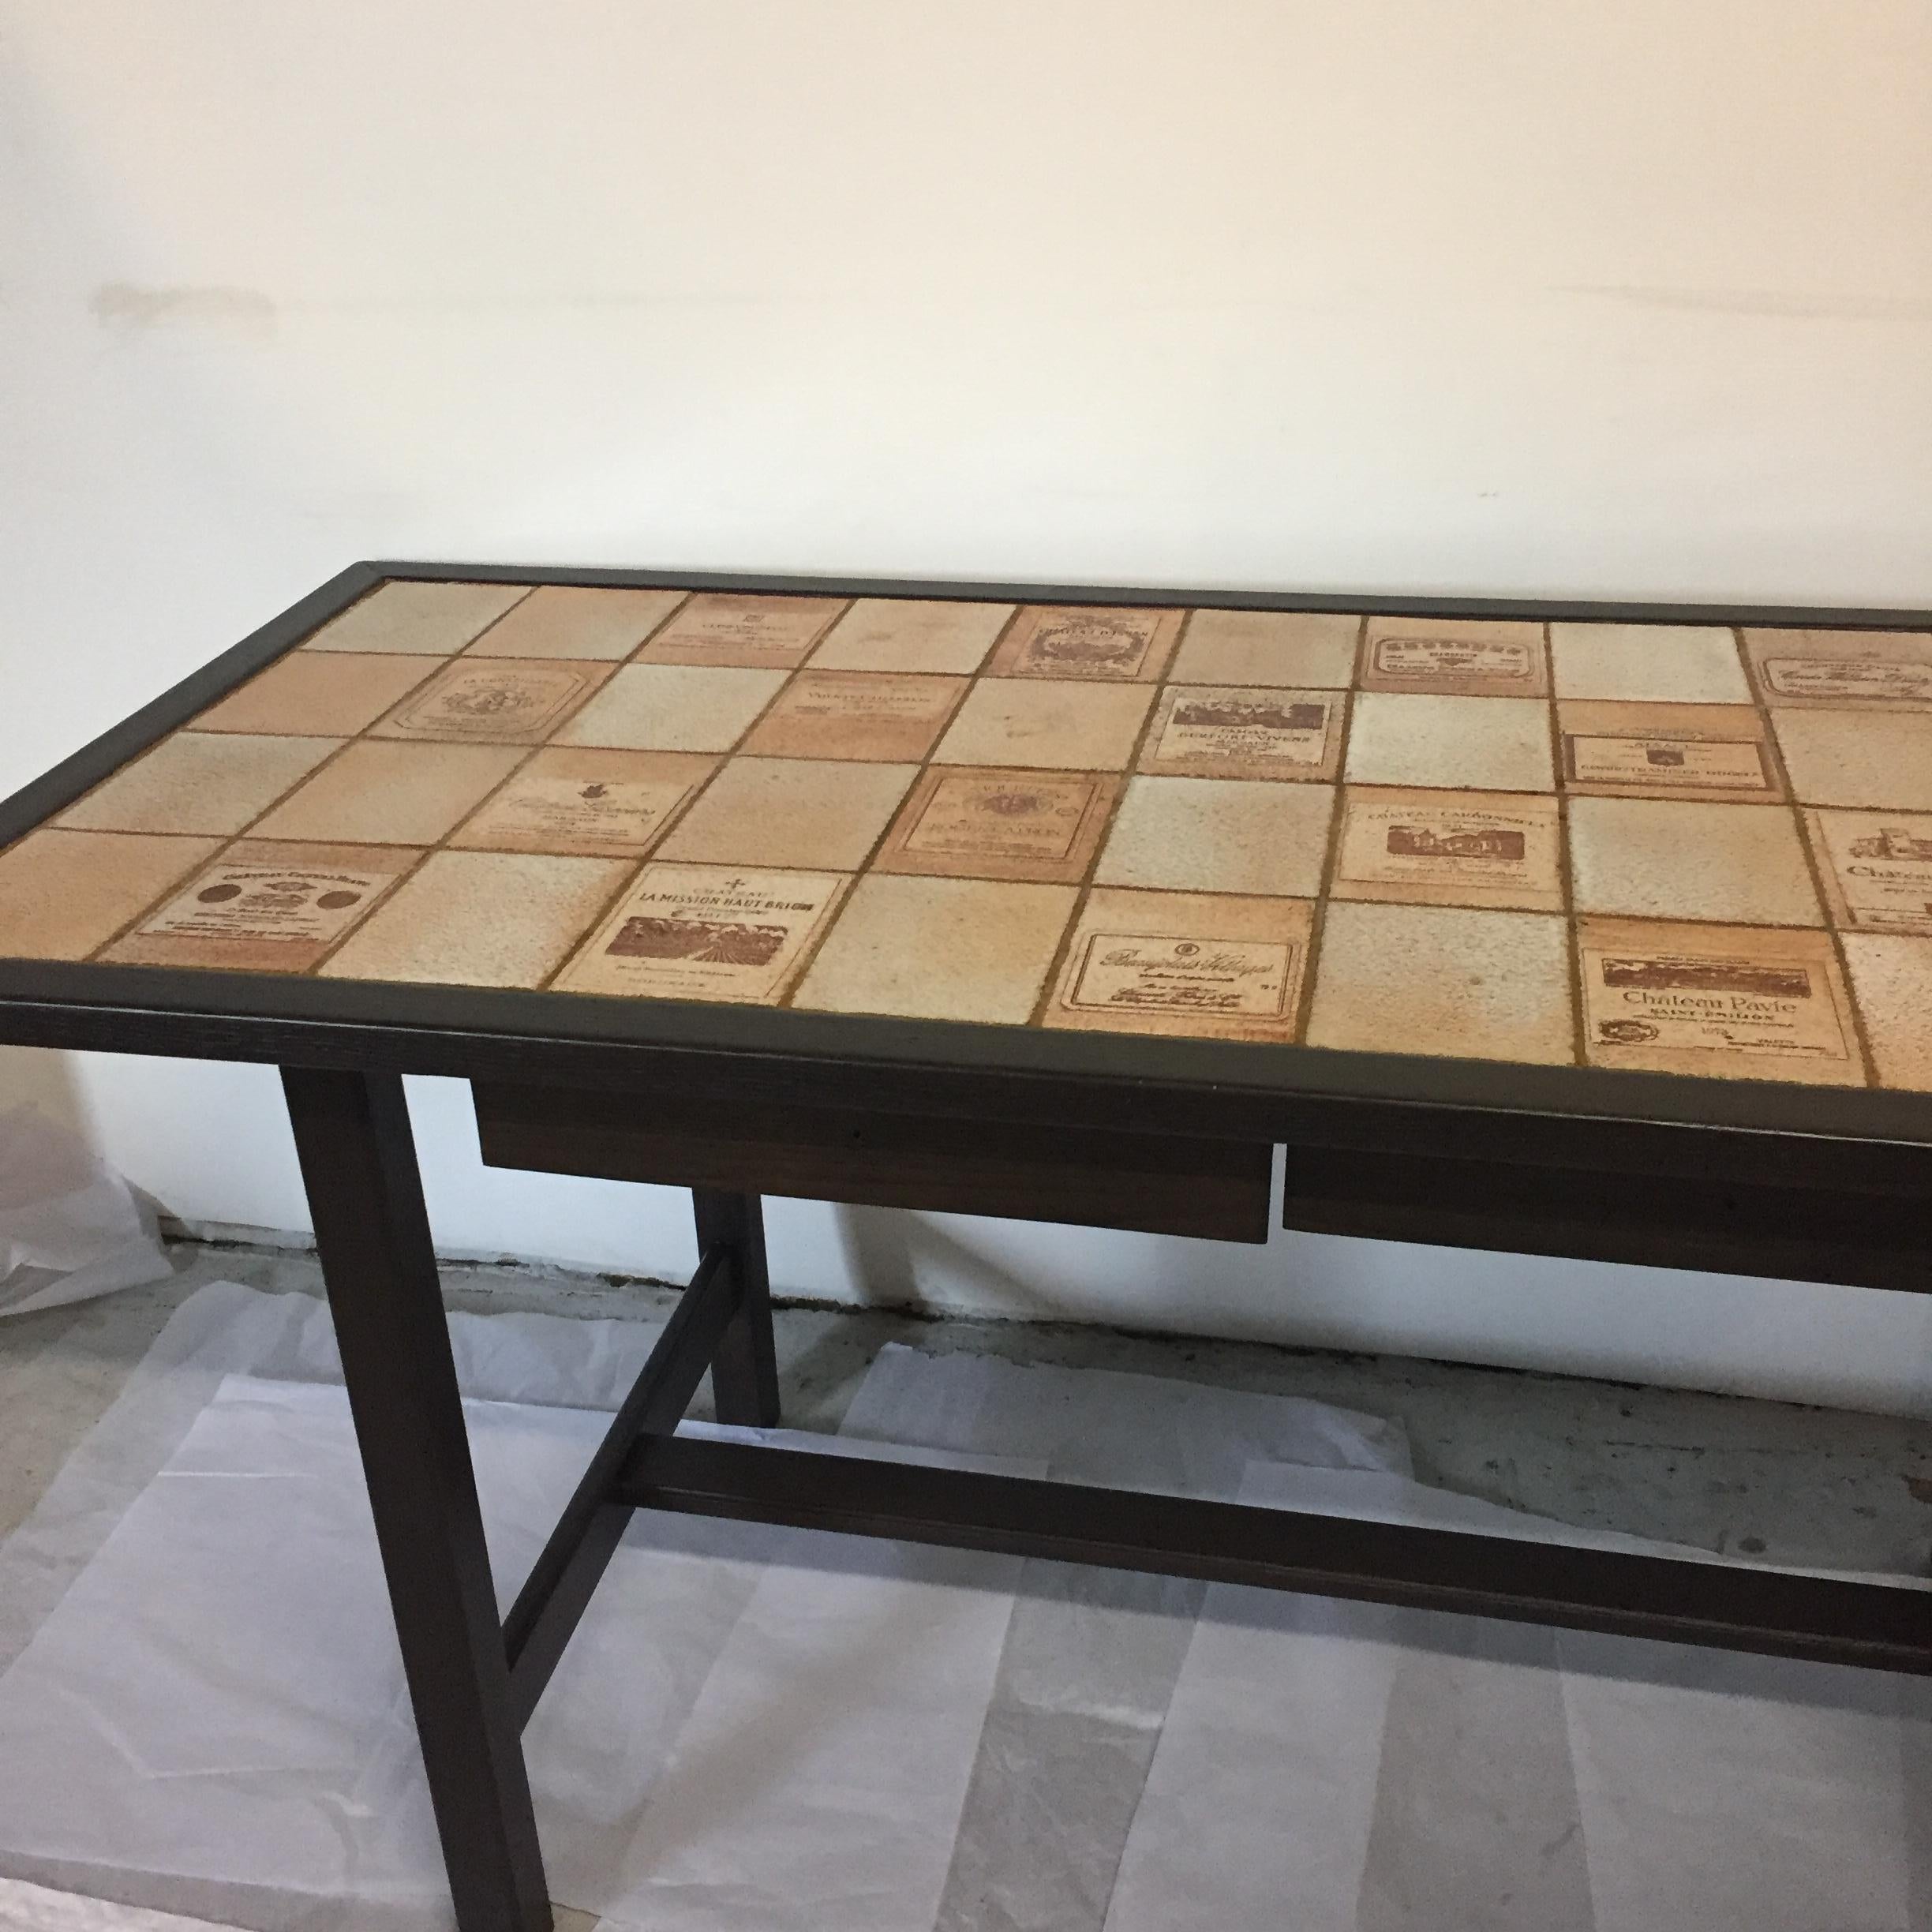 Roger Capron Ceramic and Wood Dining Table Signed on a Tile For Sale 6